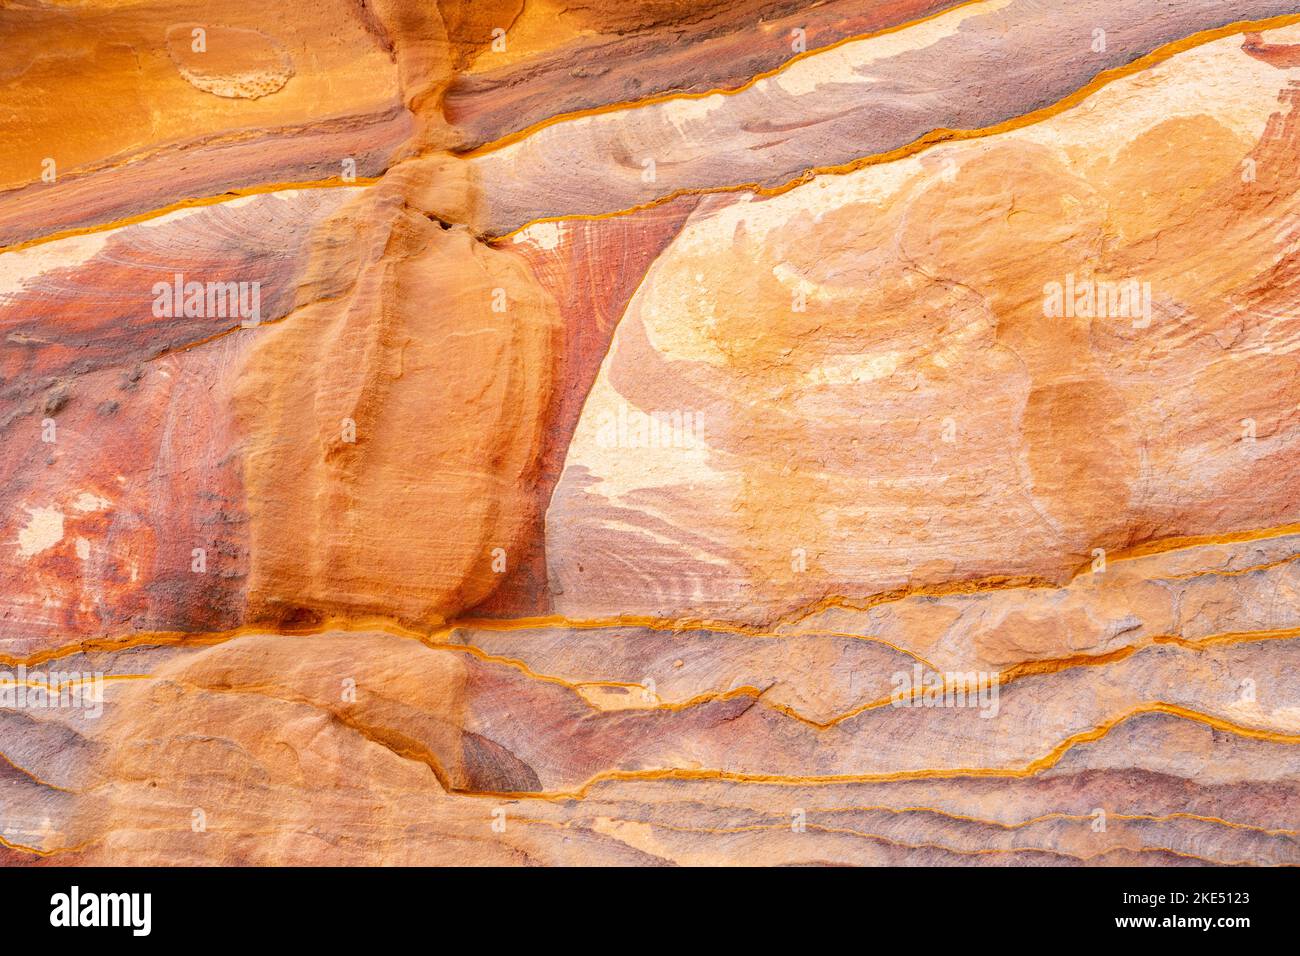 Colouresd rocks on the path to the monastery in Petra Jordan Stock Photo